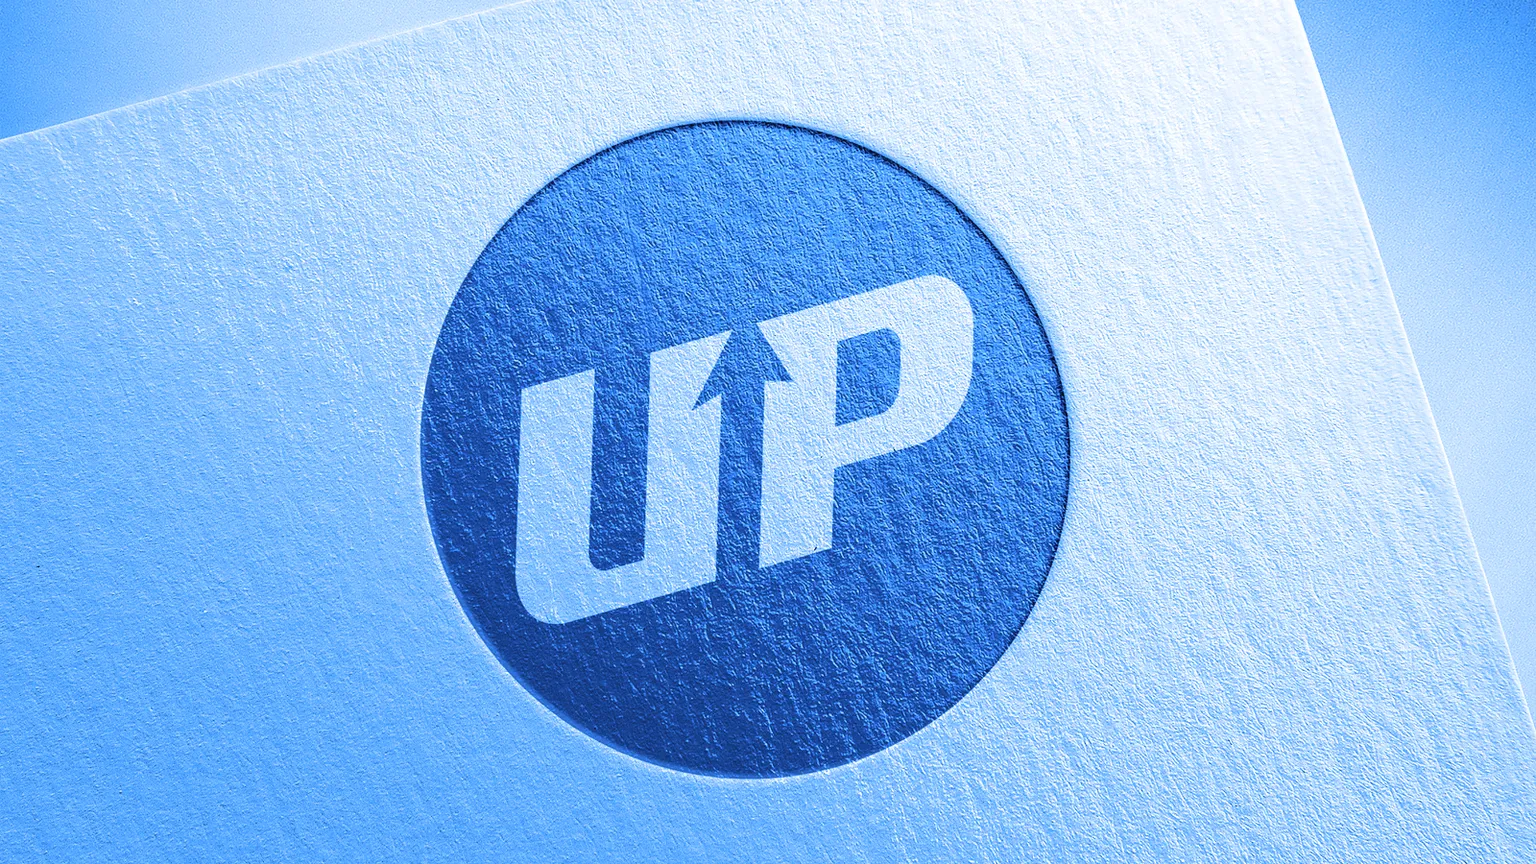 Upbit is one of the largest cryptocurrency exchanges in South Korea. Image: Shutterstock